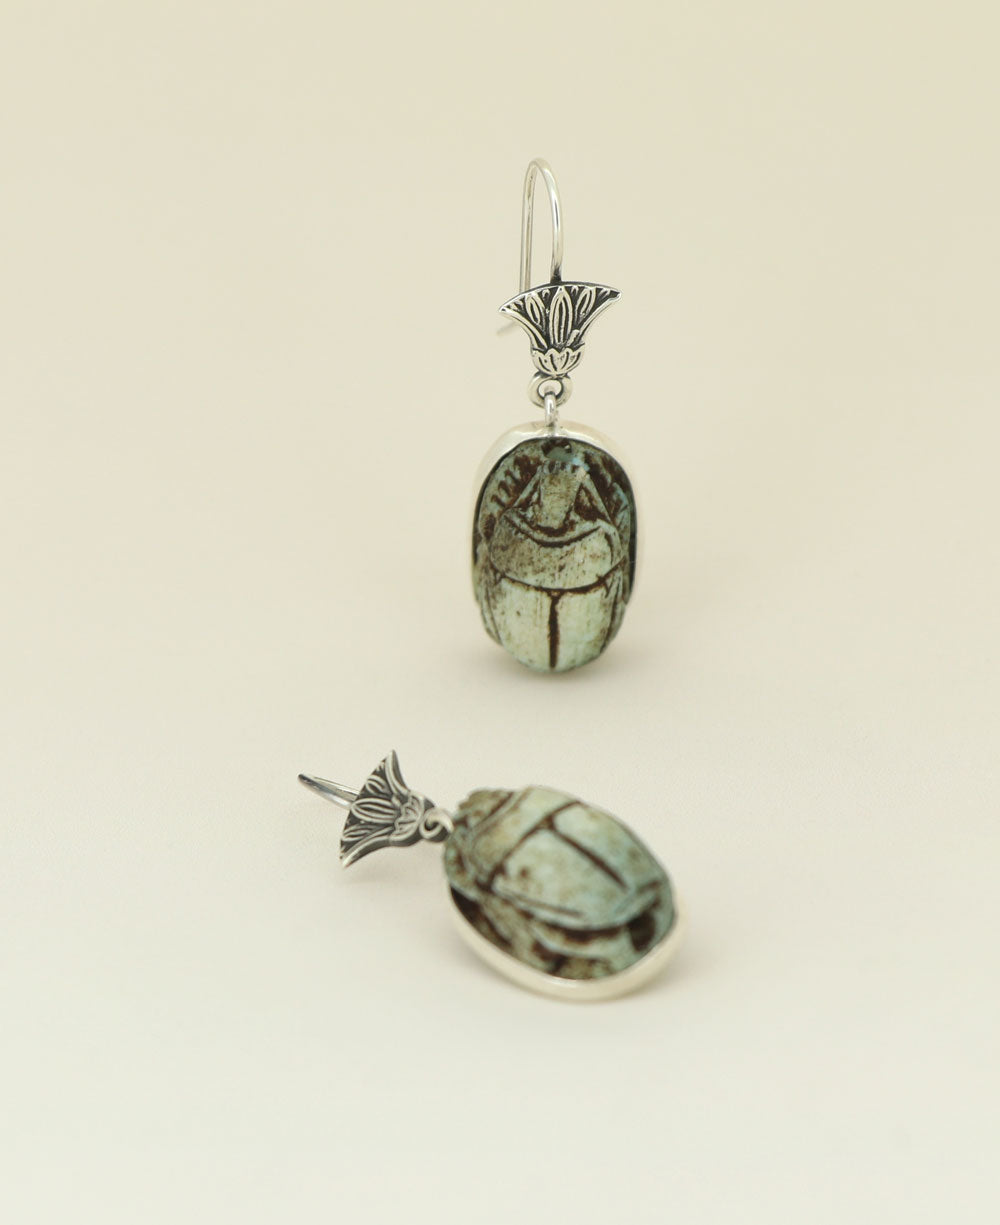 Intricately Carved Scarab and Lotus Design on Sterling Silver Earrings